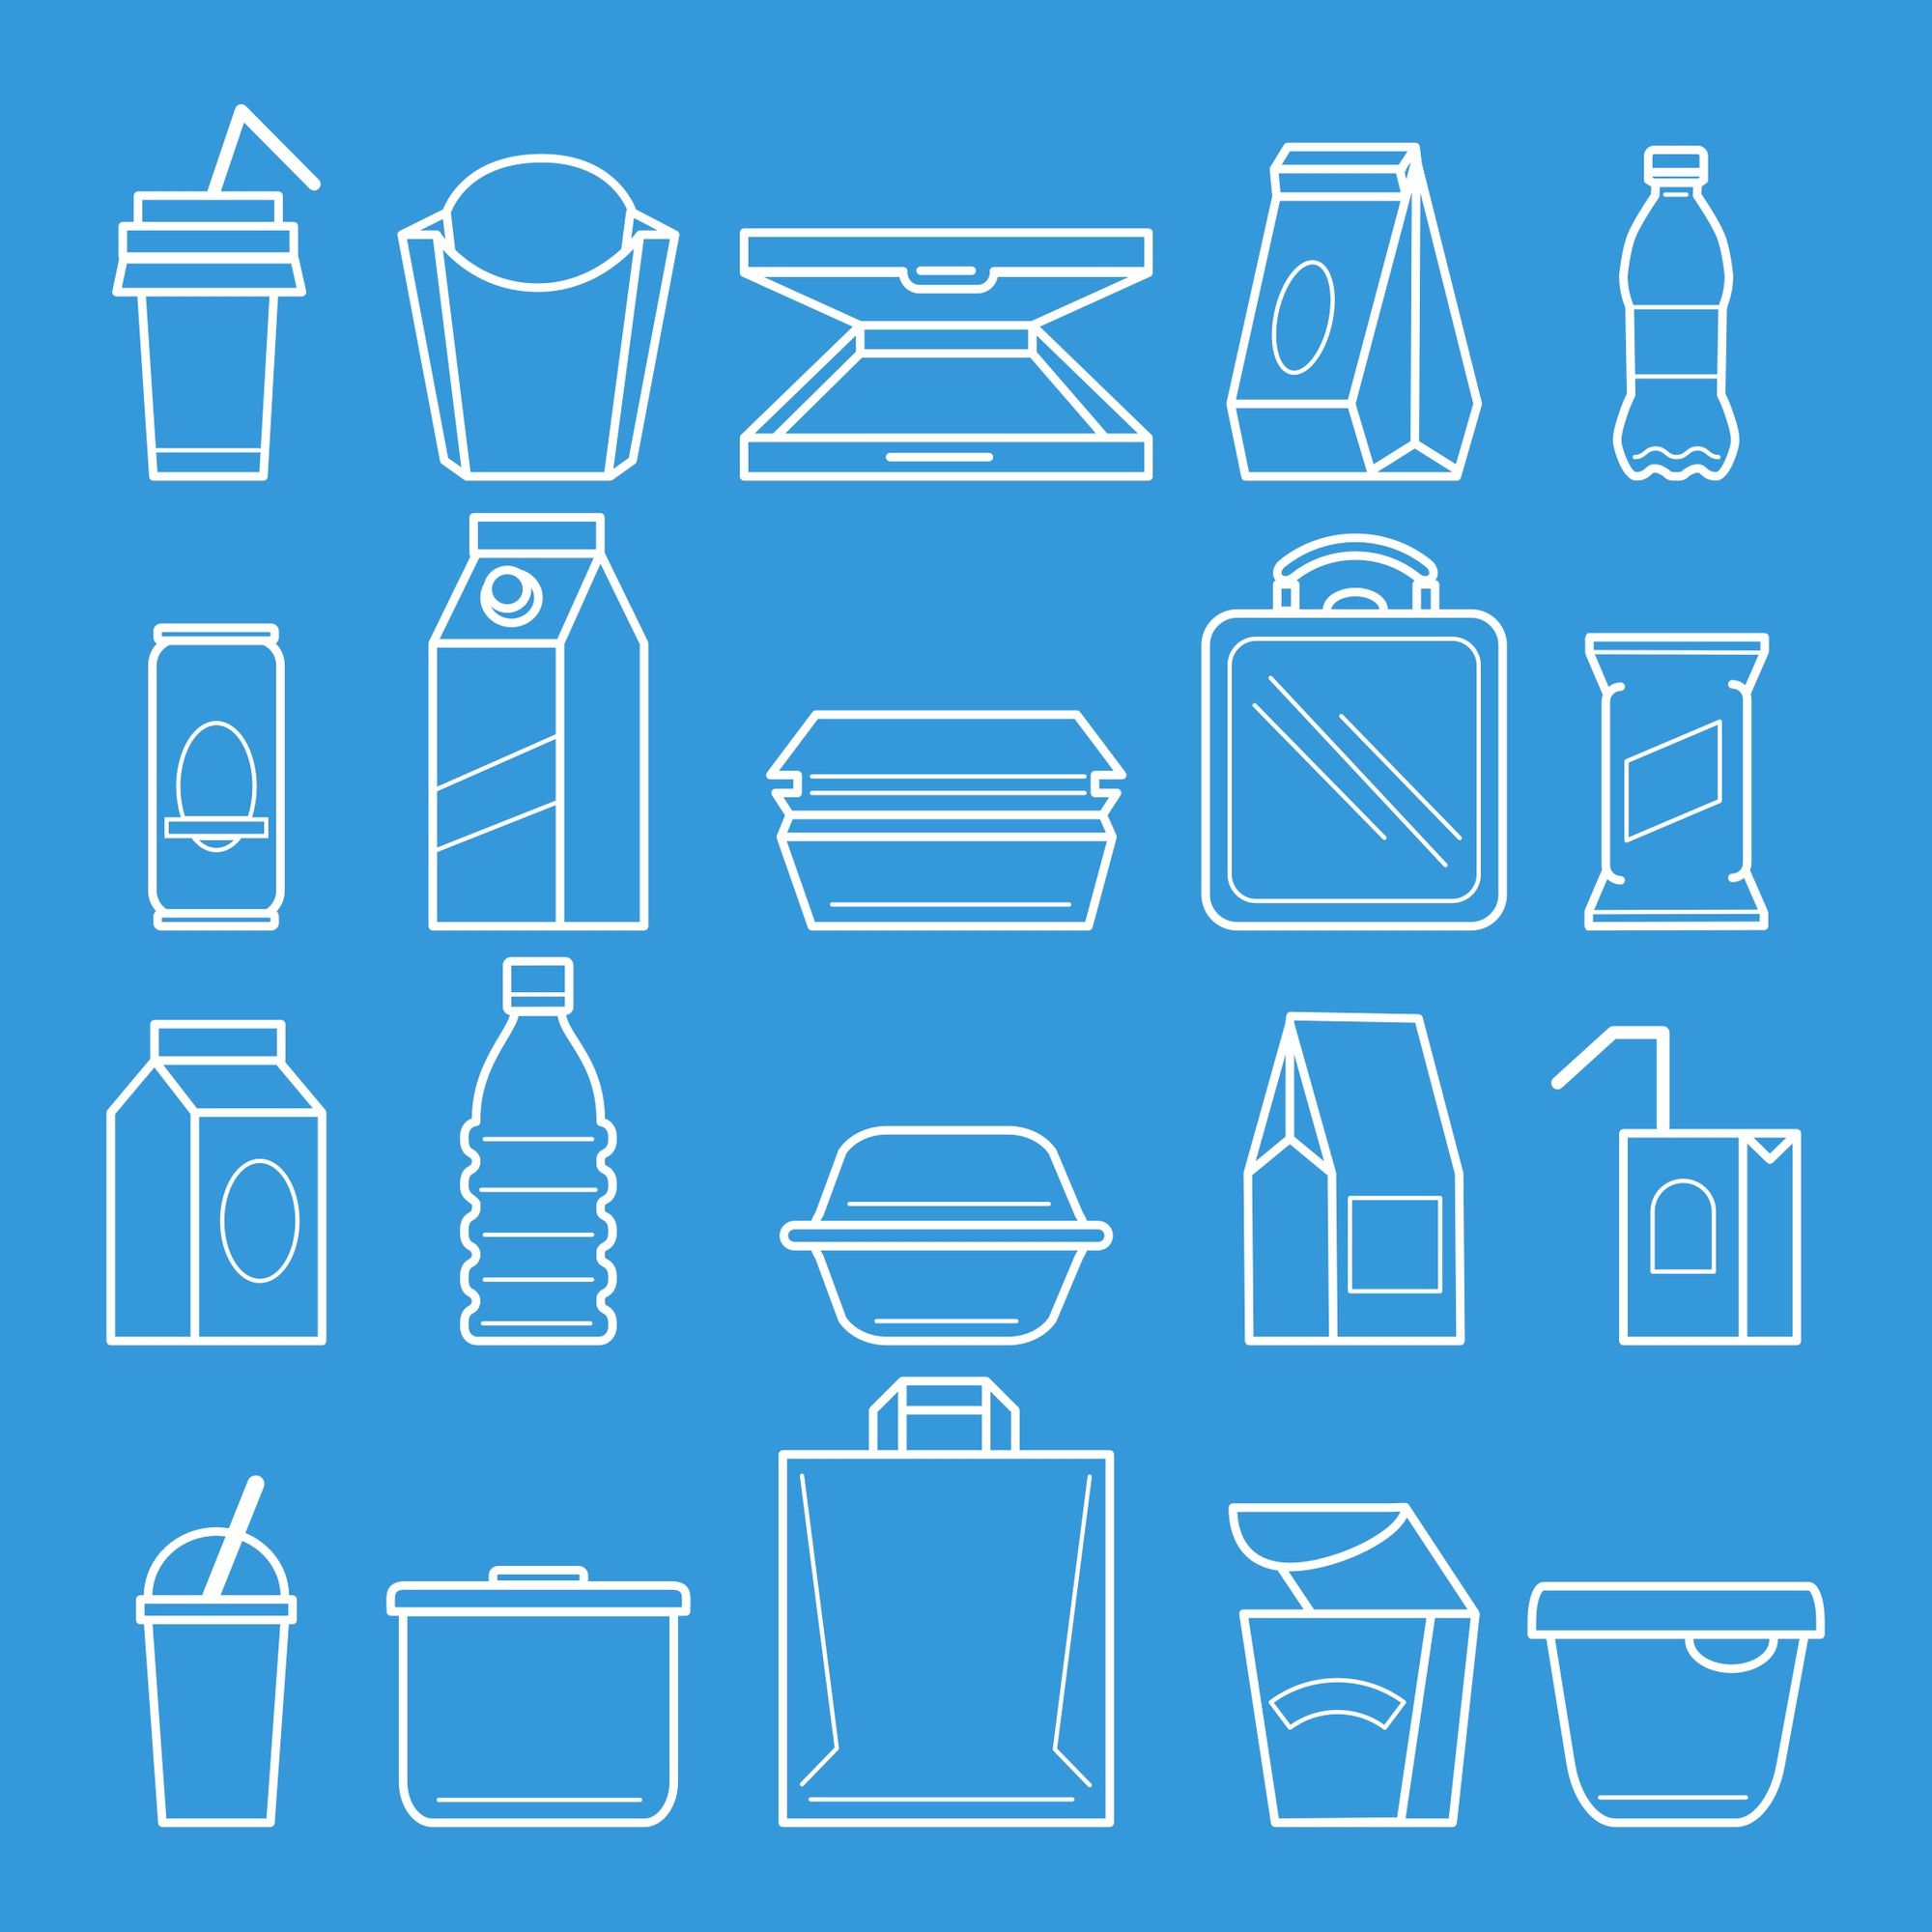 Graphic showing different food packaging types